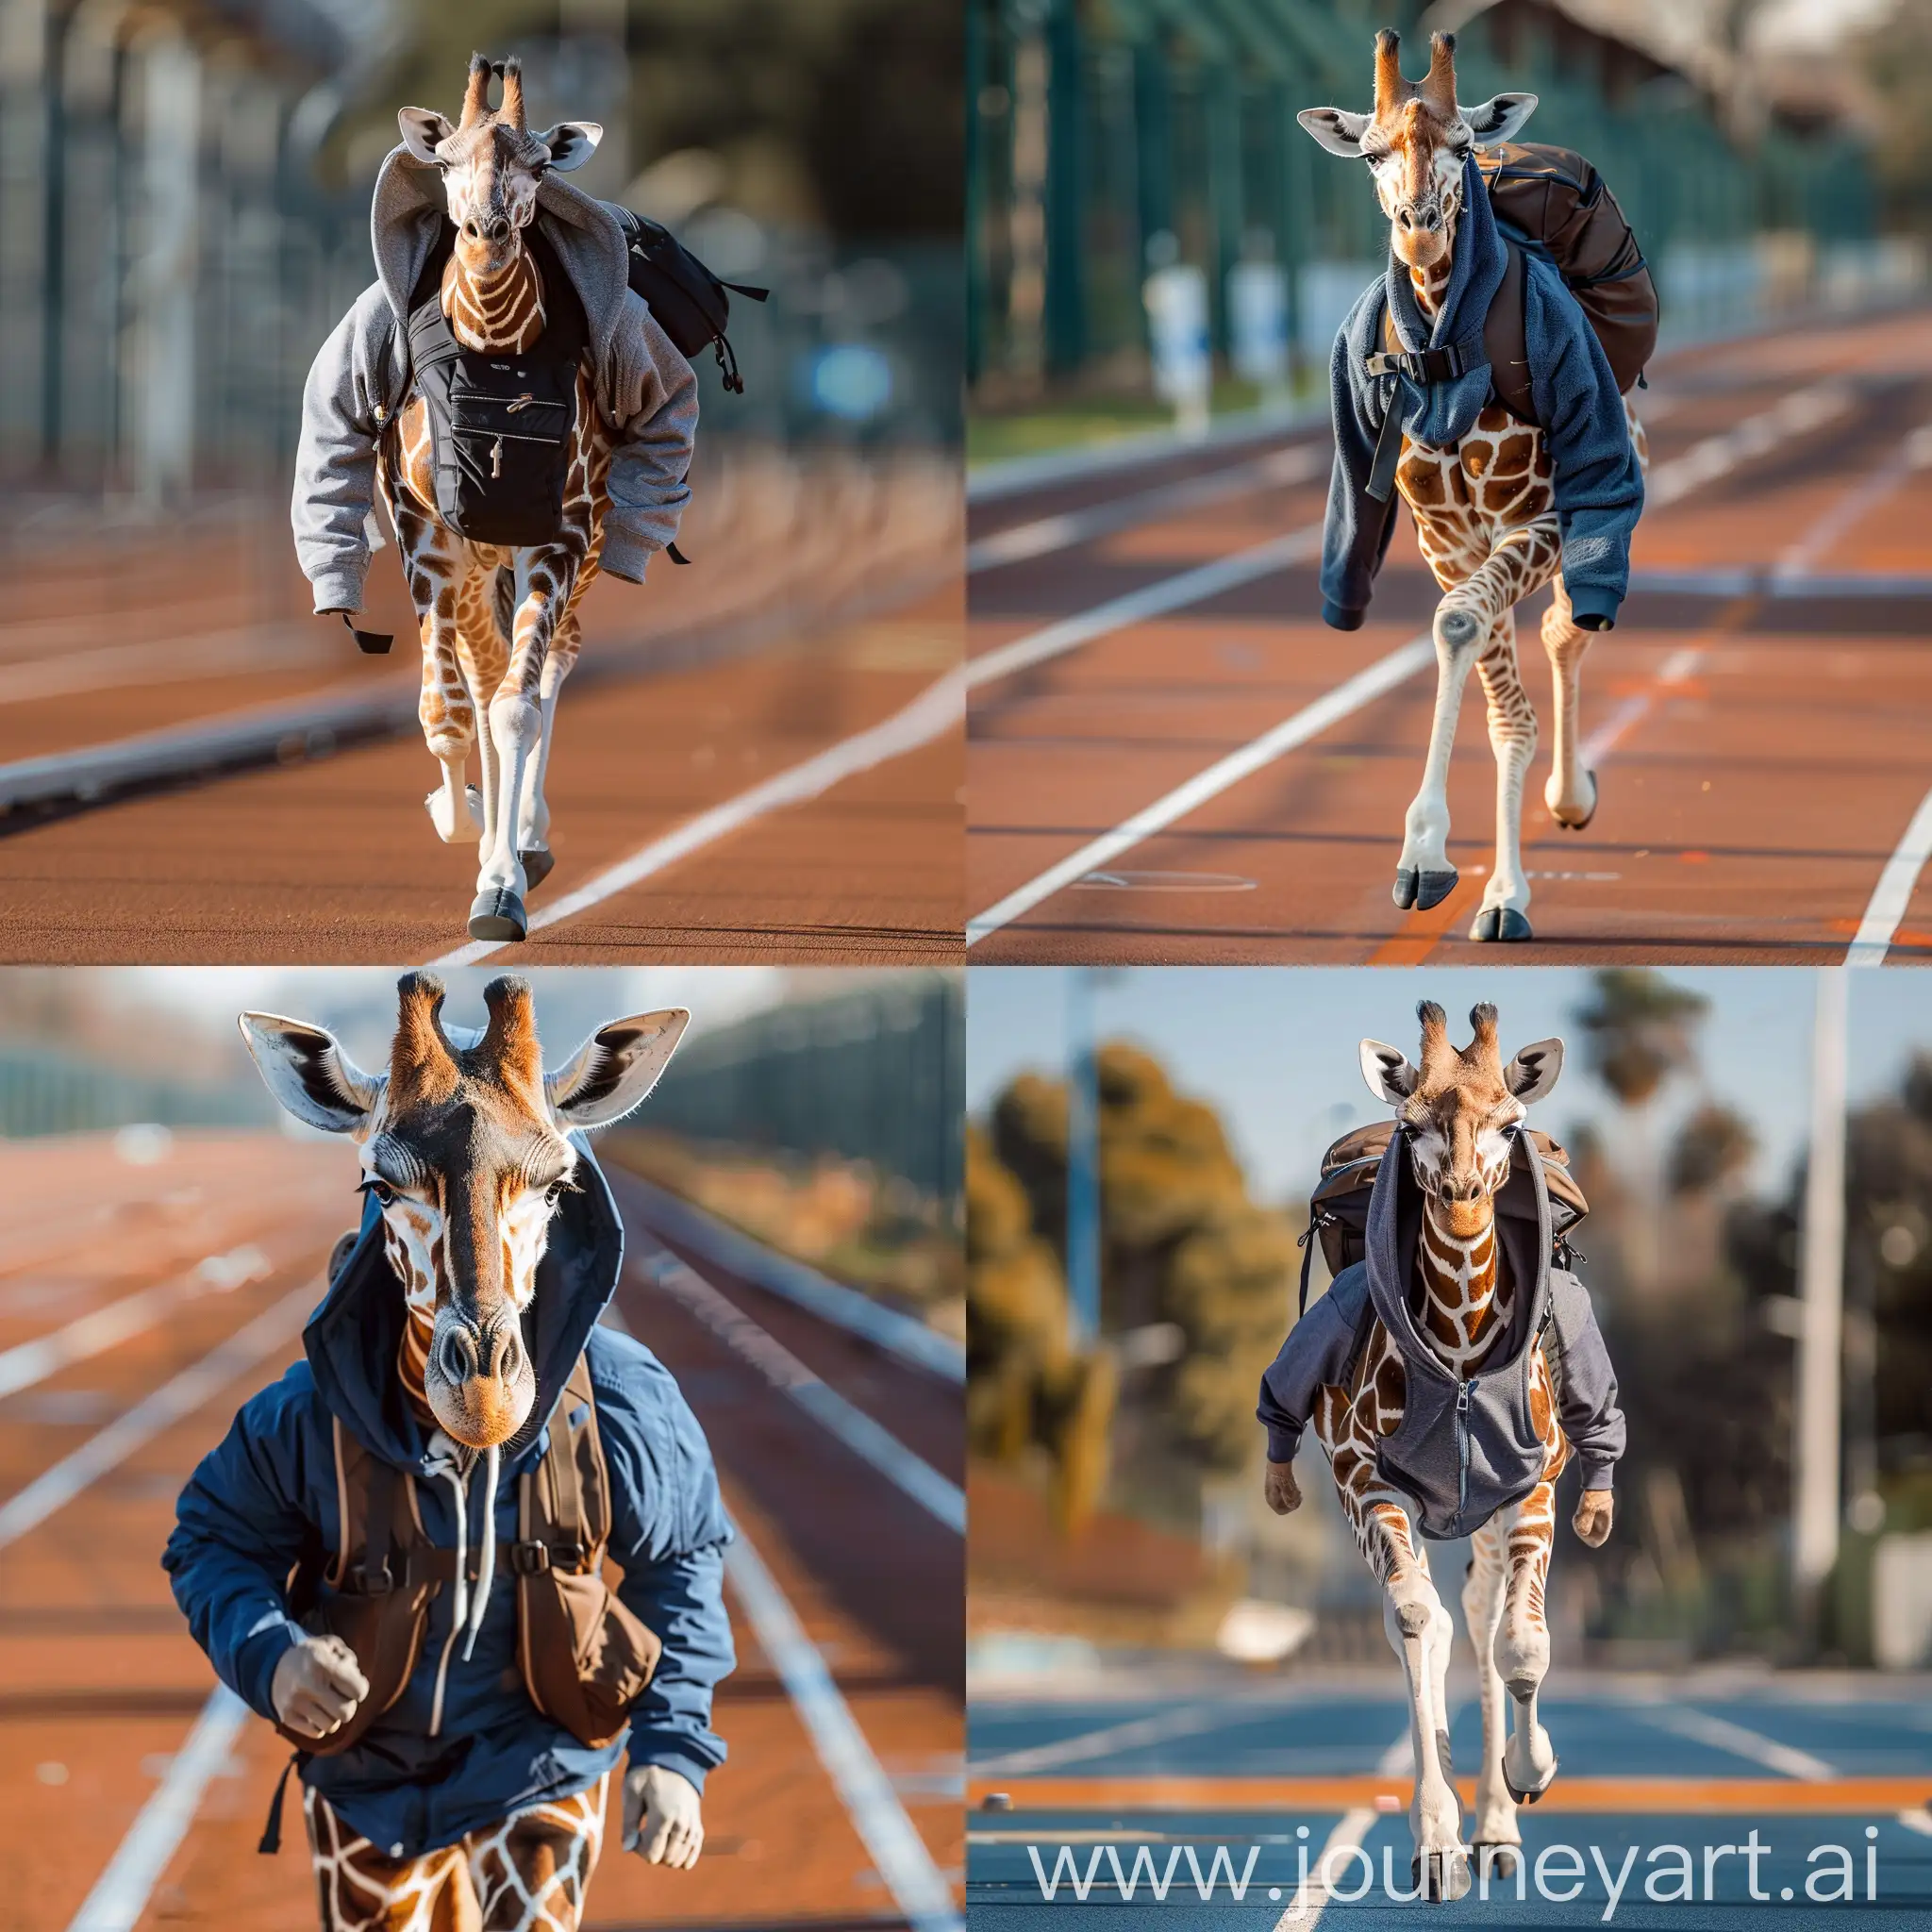 Sporty-Giraffe-Running-on-Track-with-Hood-and-Backpack